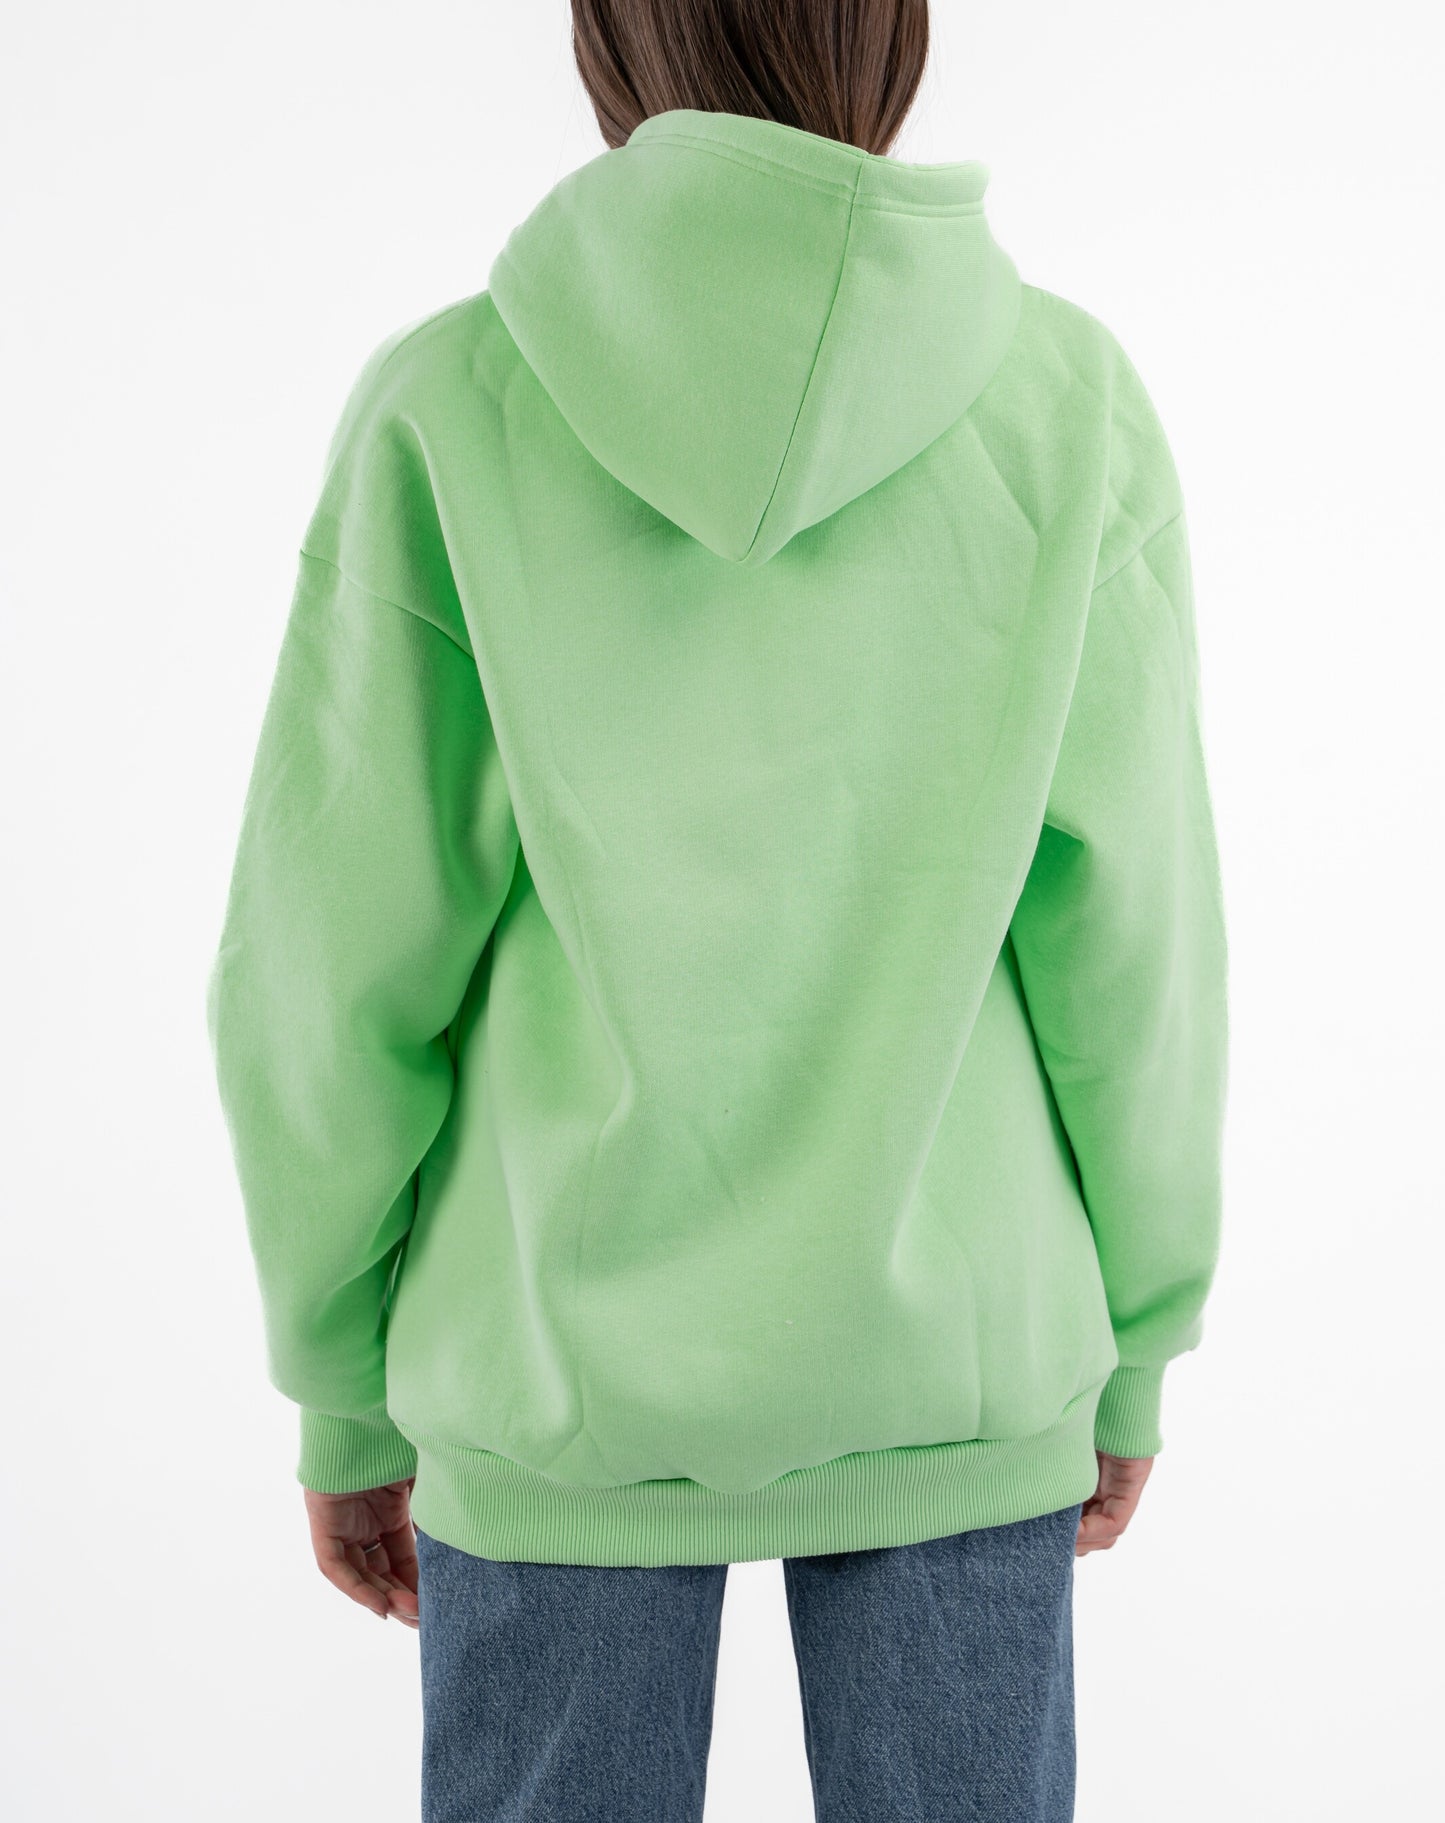 LIME GREEN OVER-SIZED HOODIE